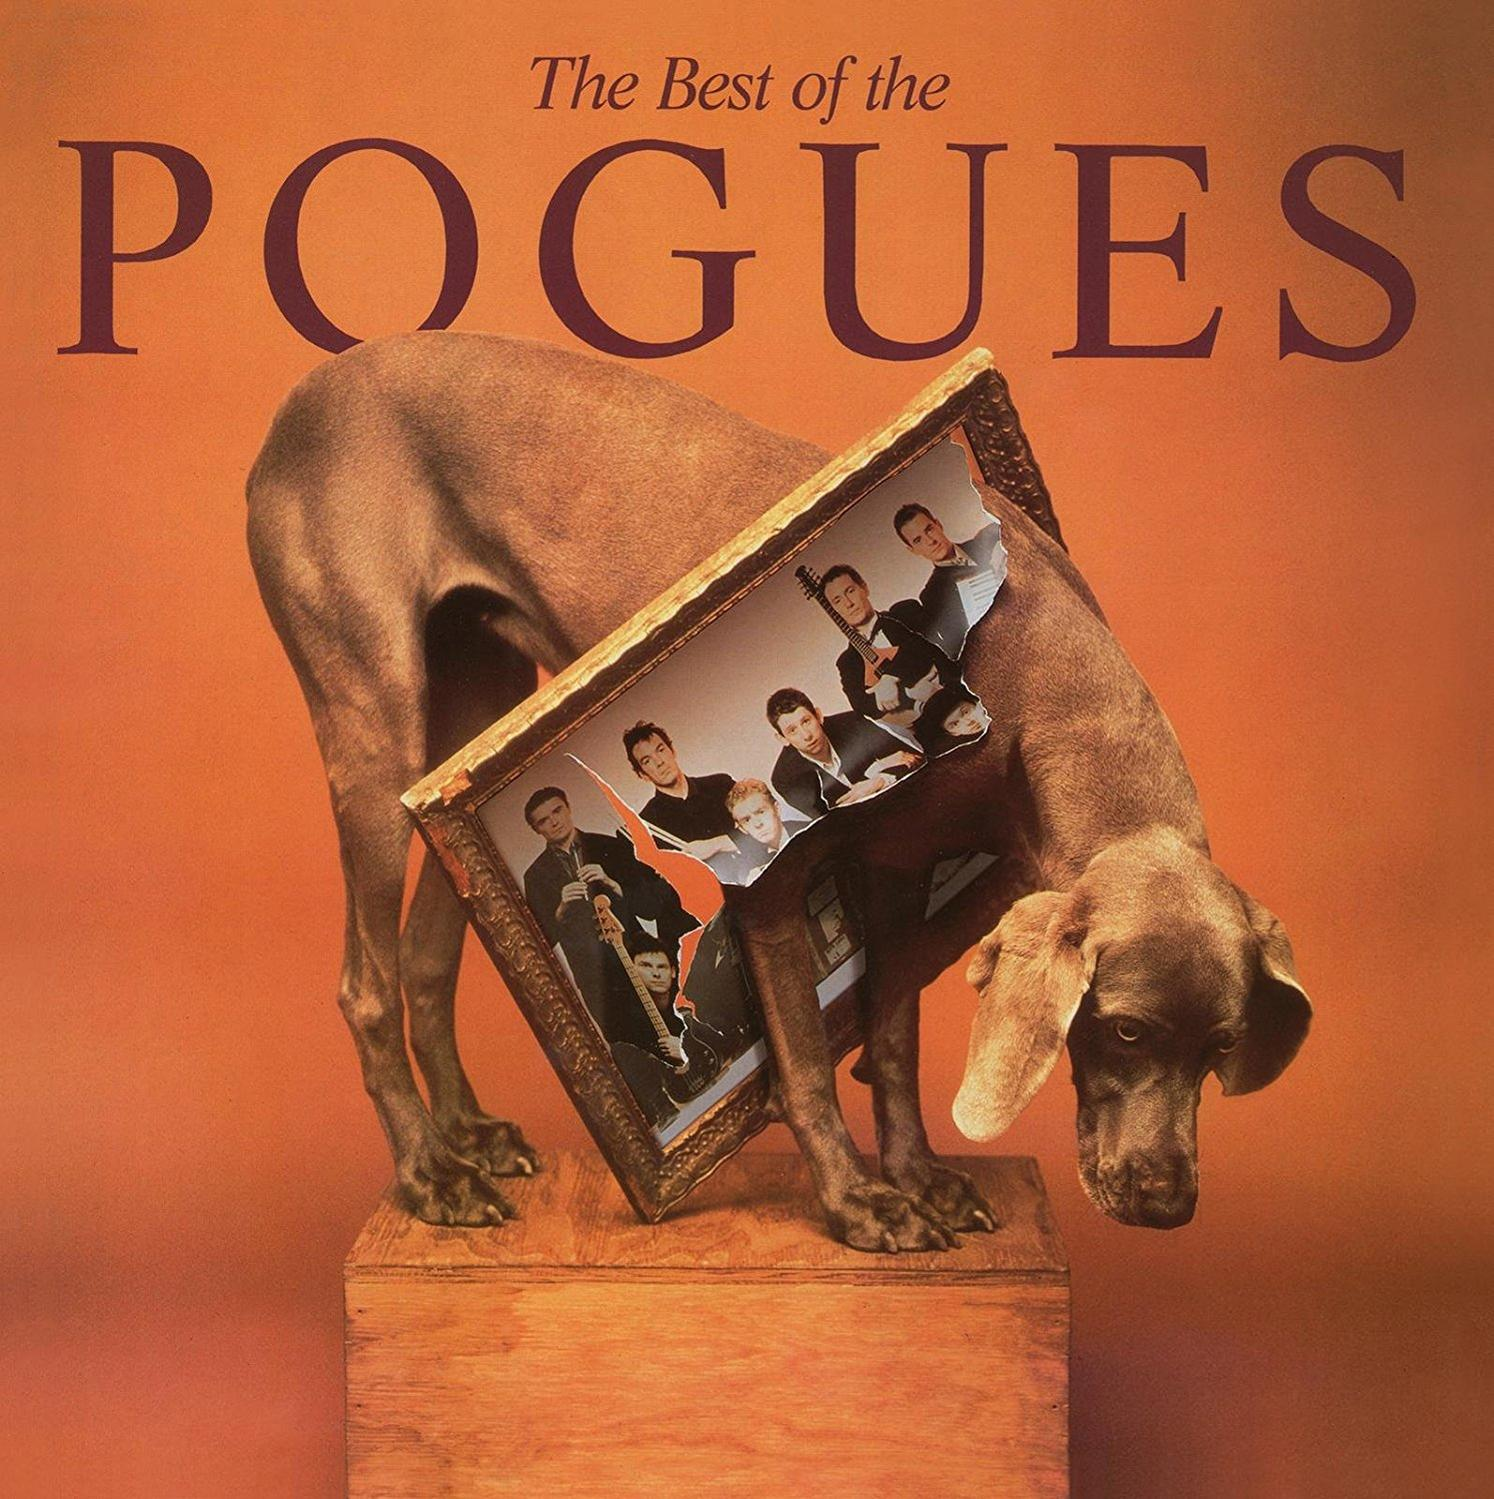 Pogues Best The of - - The Pogues (Vinyl) The